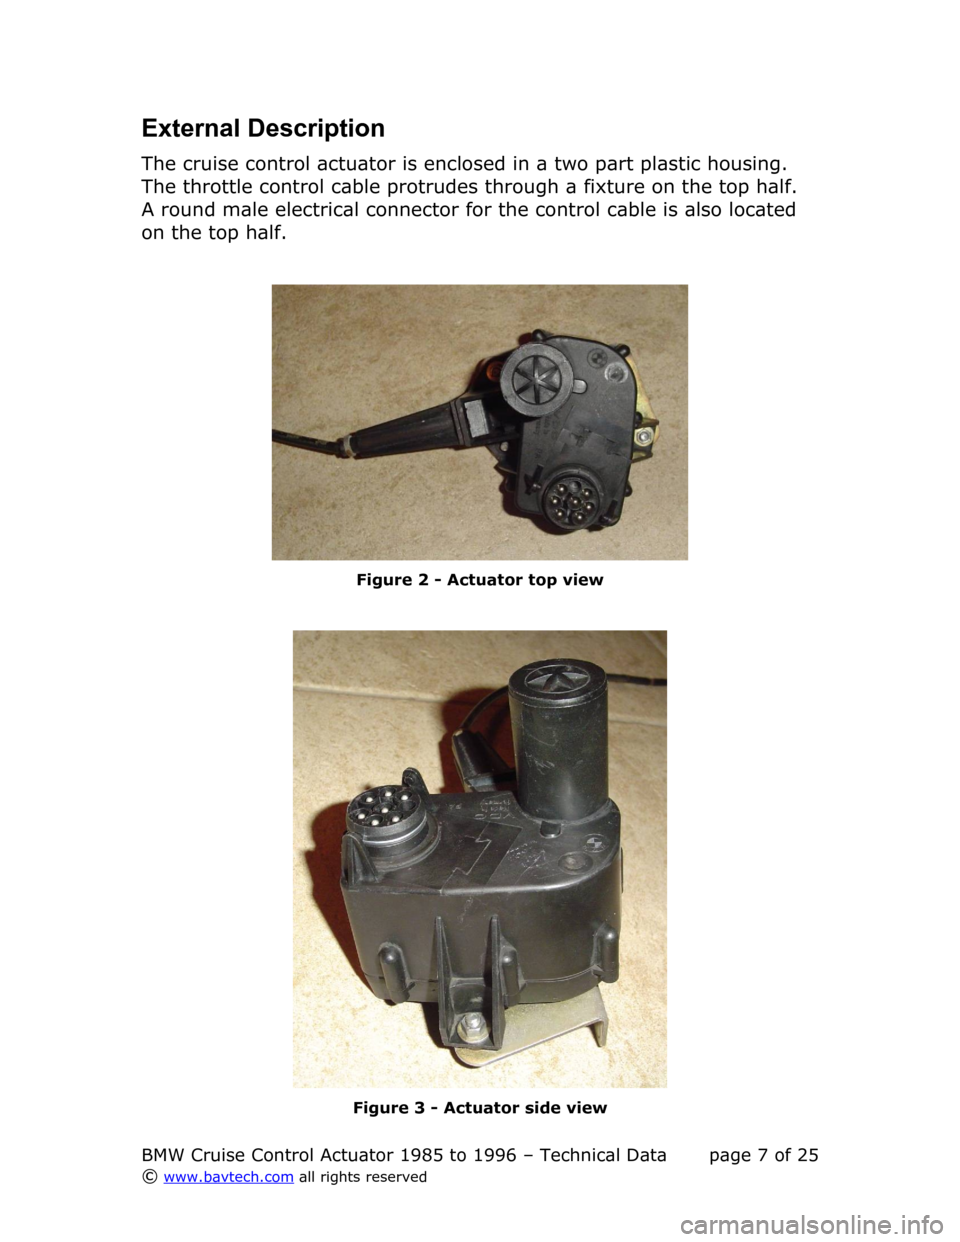 BMW 8 SERIES 1994 E31 Cruise Control Acutator External Description
The cruise control actuator is enclosed in a two part plastic housing.  
The throttle control cable protrudes through a fixture on the top half.  
A round male electrical connecto